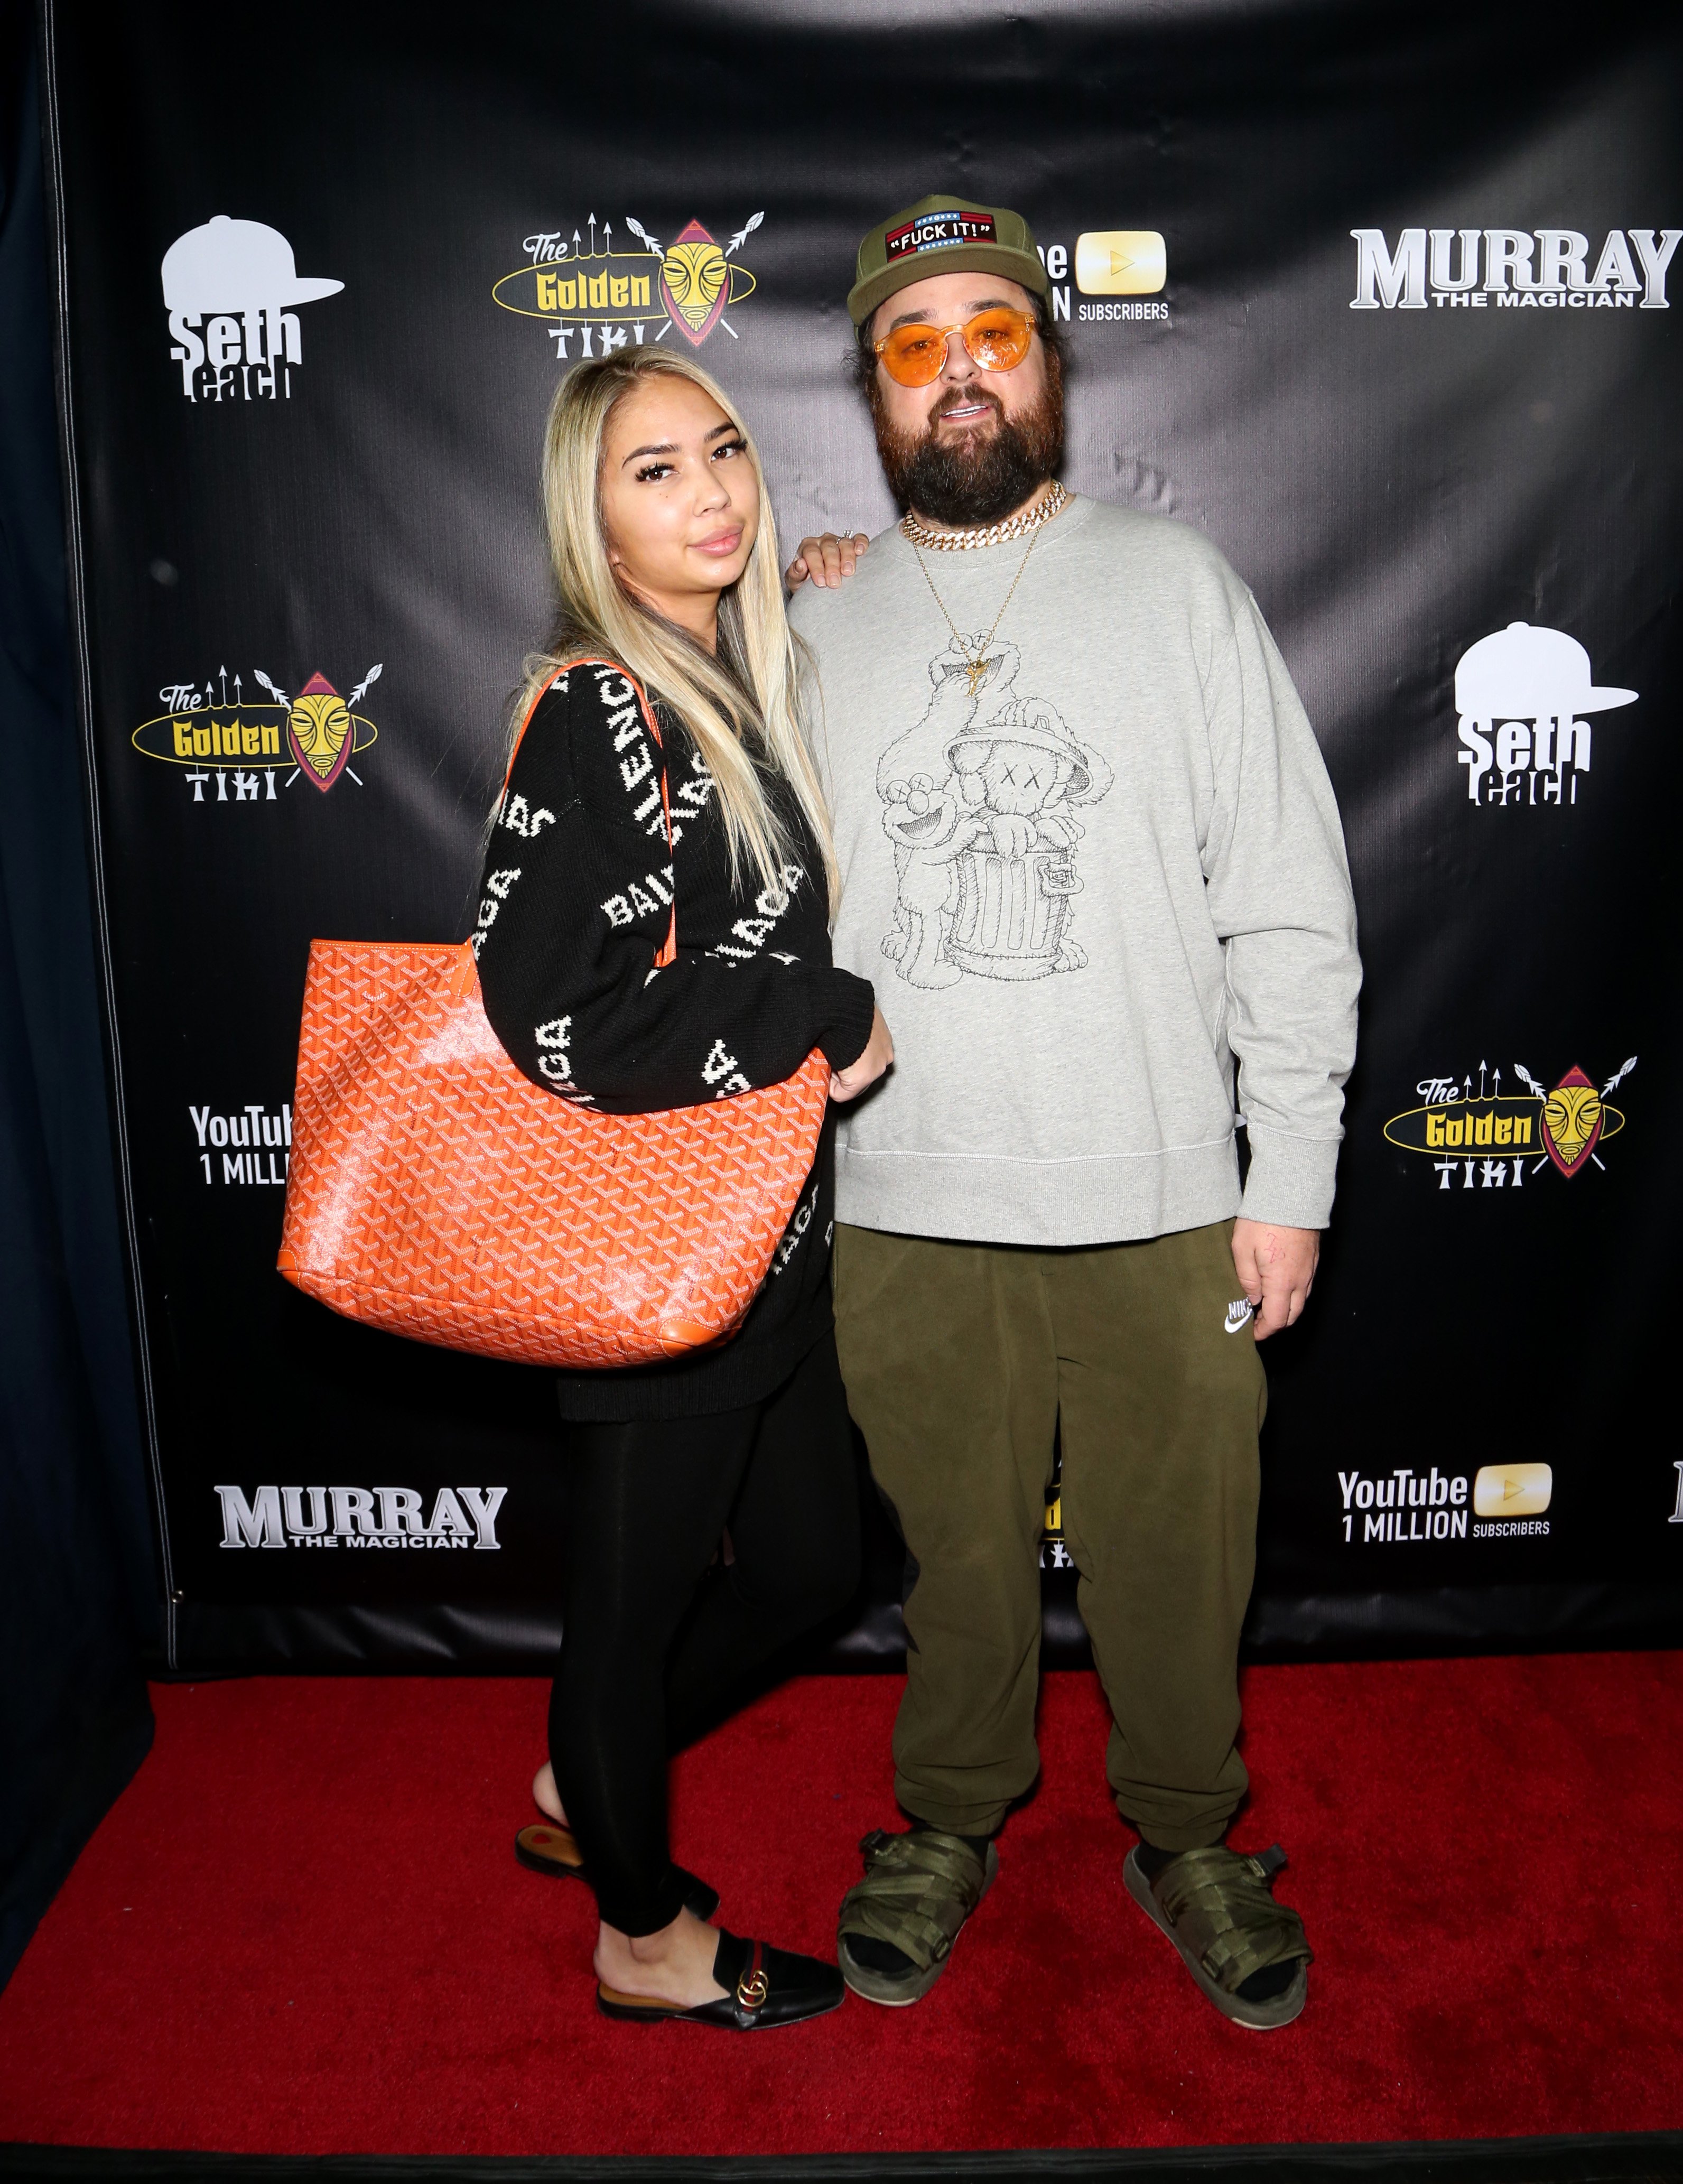 Olivia Russell and Austin "Chumlee" Russell from "Pawn Stars" attend Murray SawChuck's celebration of 1 Million YouTube subscribers at The Golden Tiki on December 12, 2018, in Las Vegas, Nevada. | Source: Getty Images